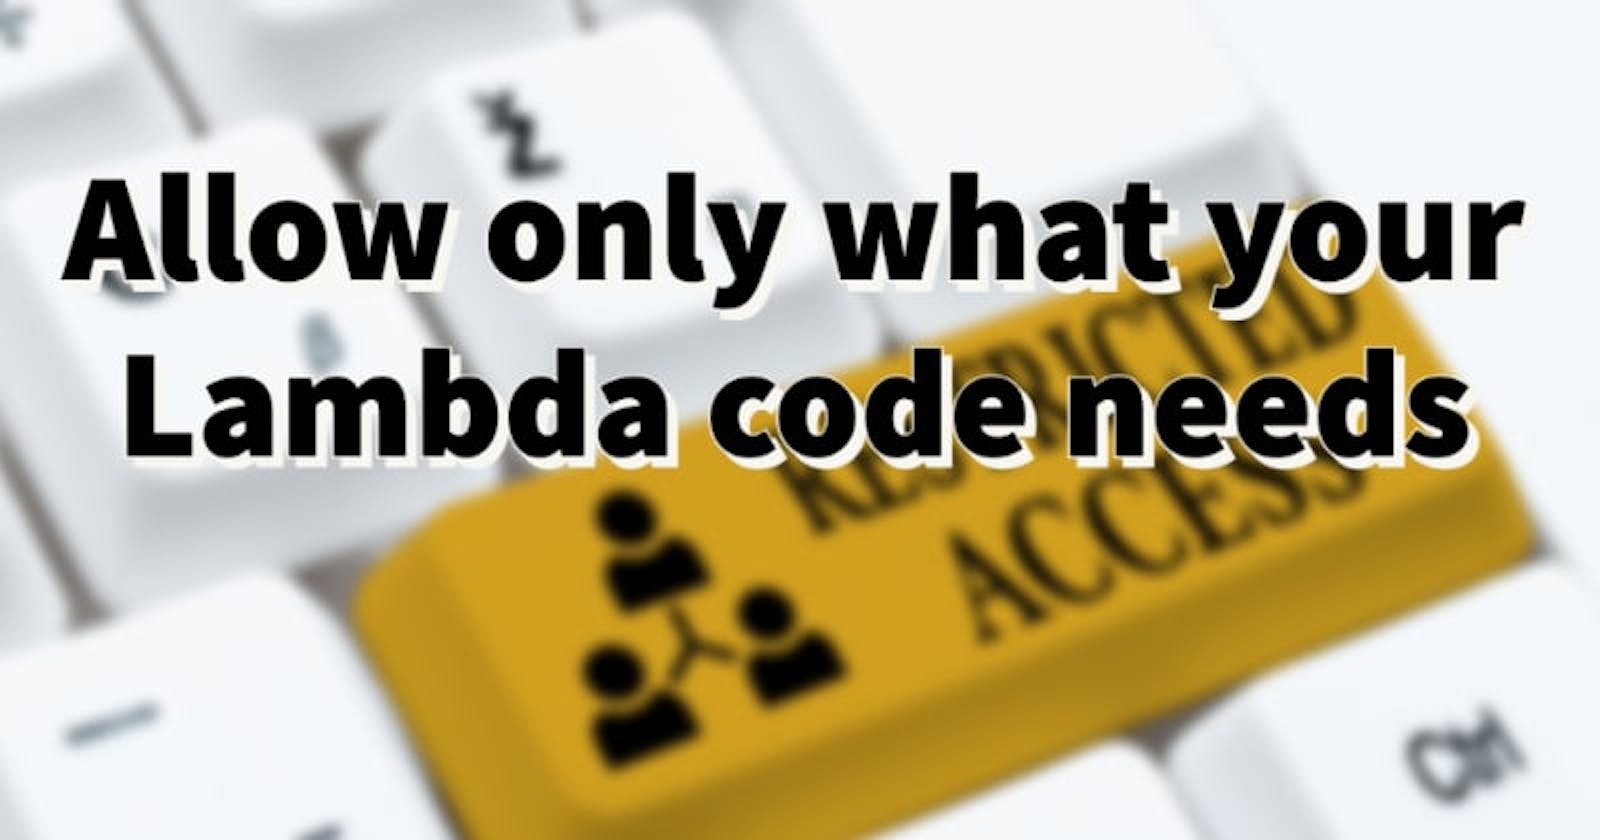 Allow only what your Lambda code needs